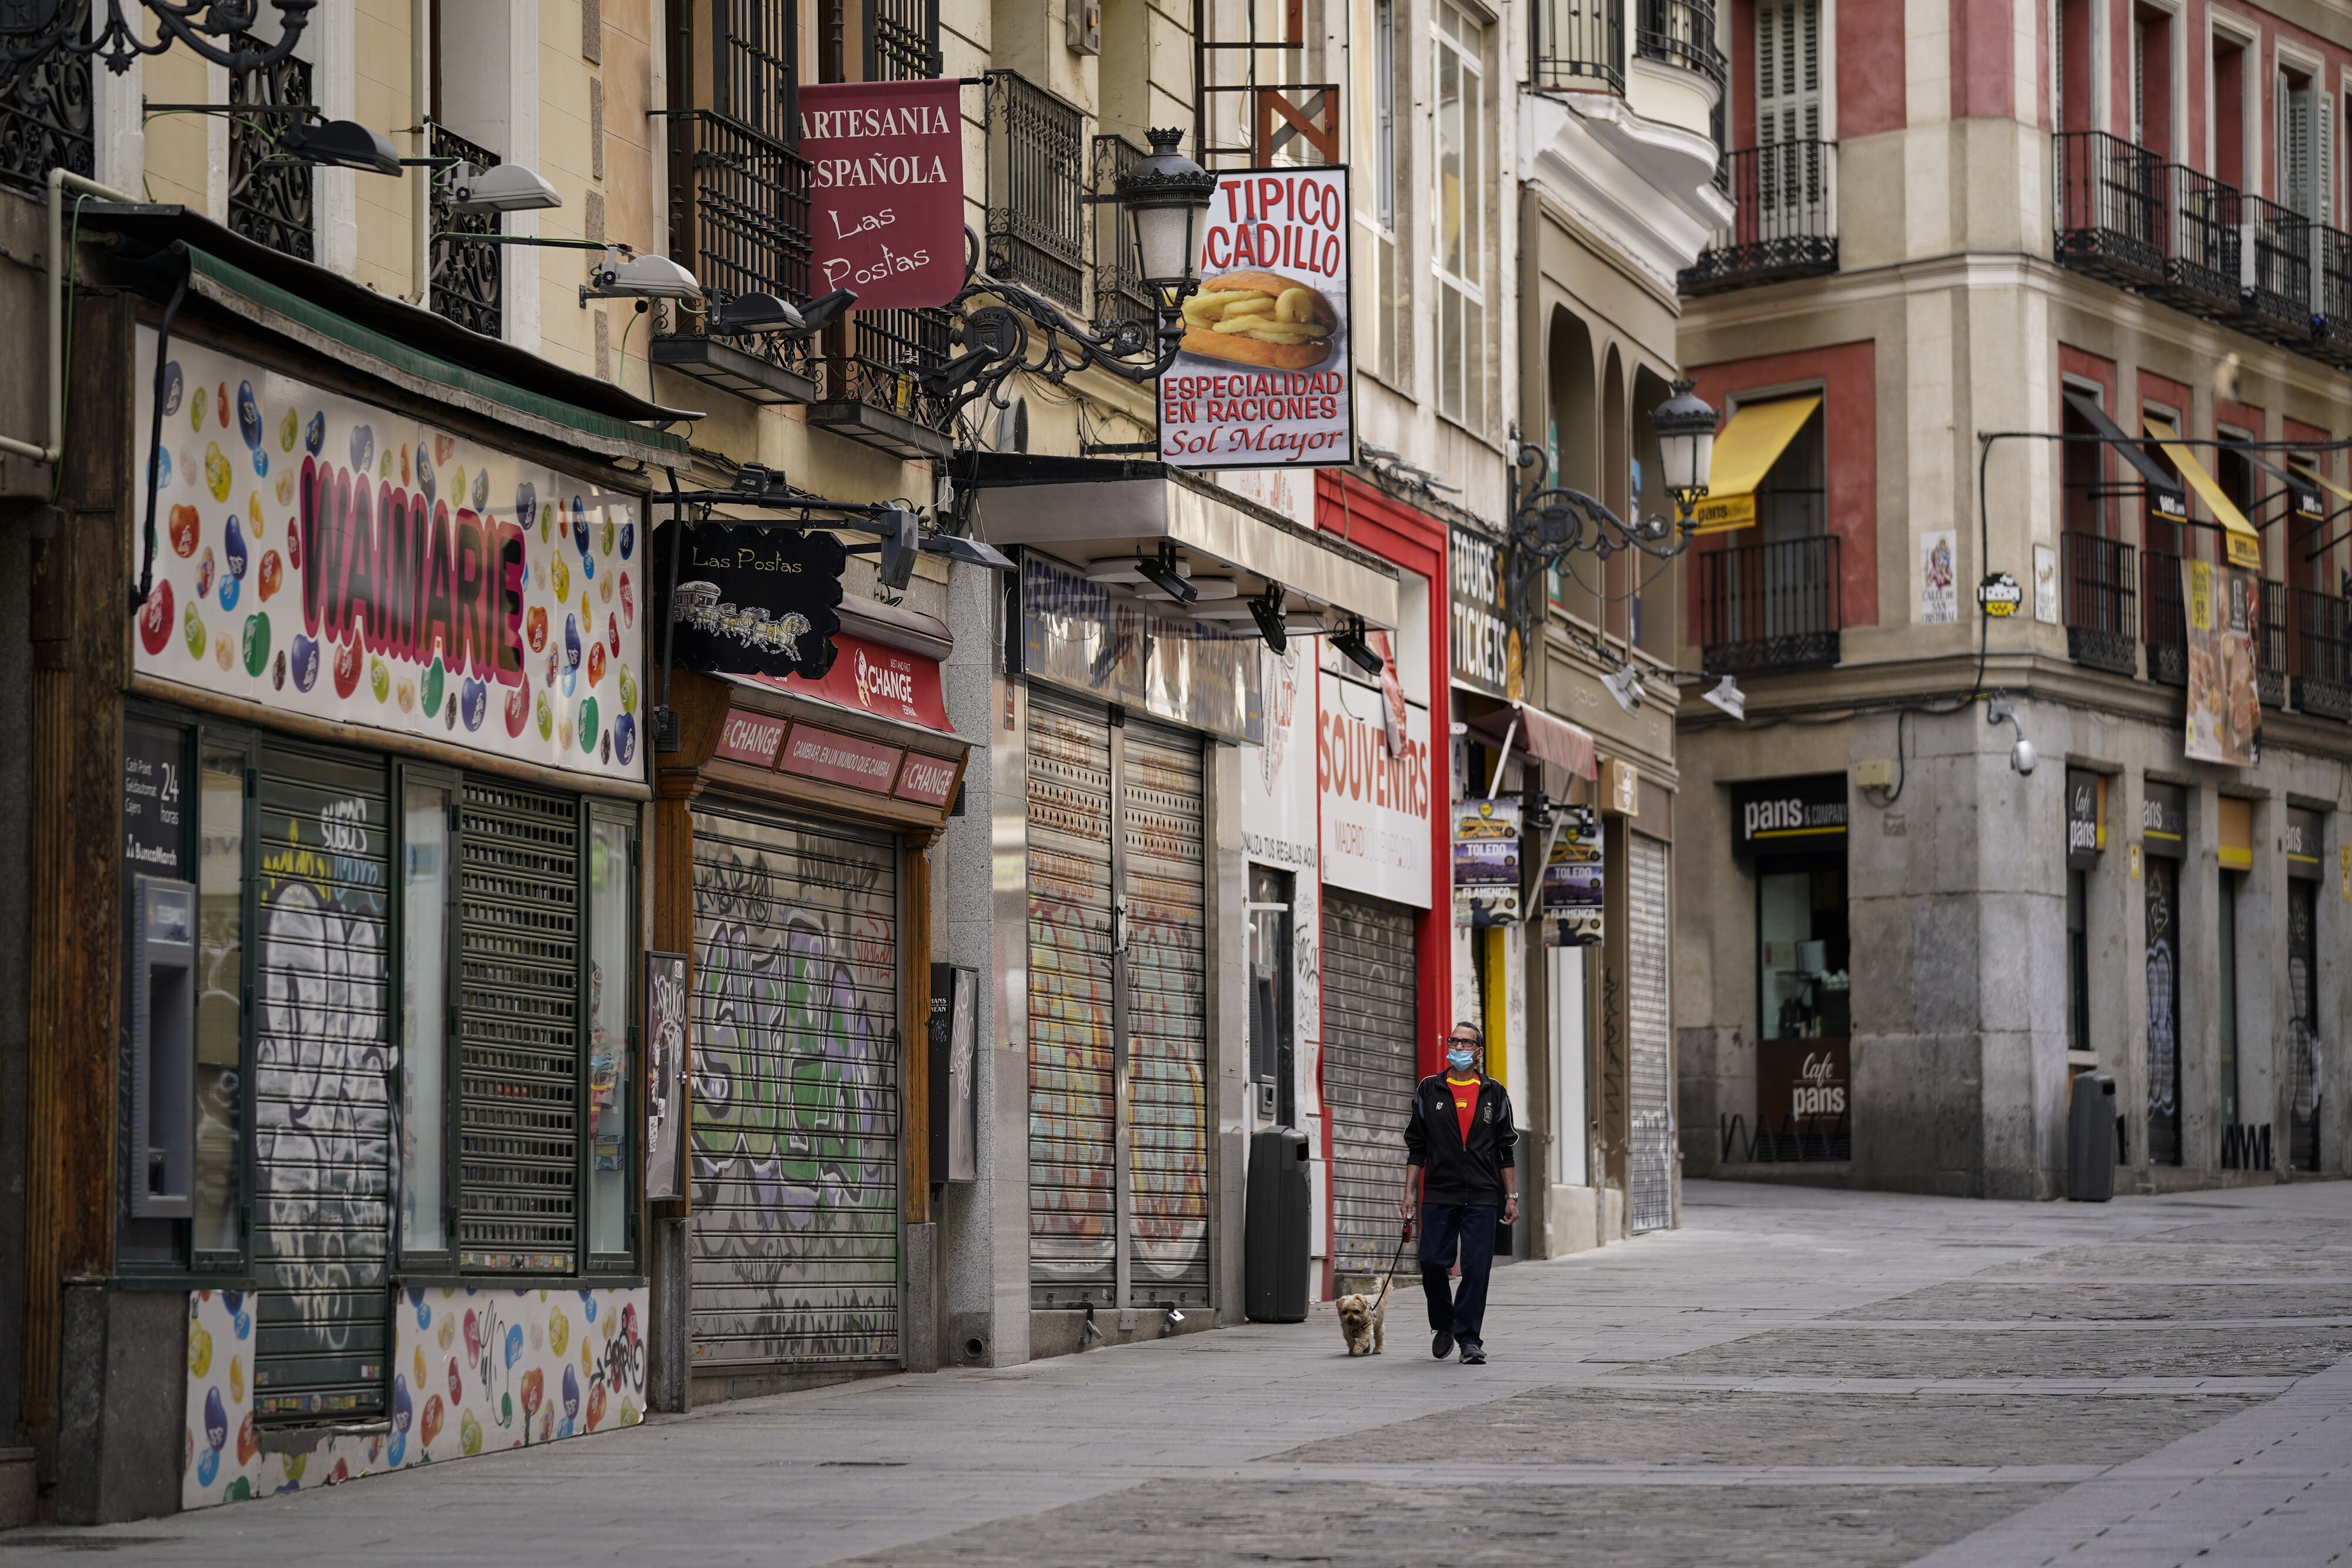 A pedestrian walks a dog along a street lined with closed cafes and shops in Madrid on May 7. Photo: Bloomberg